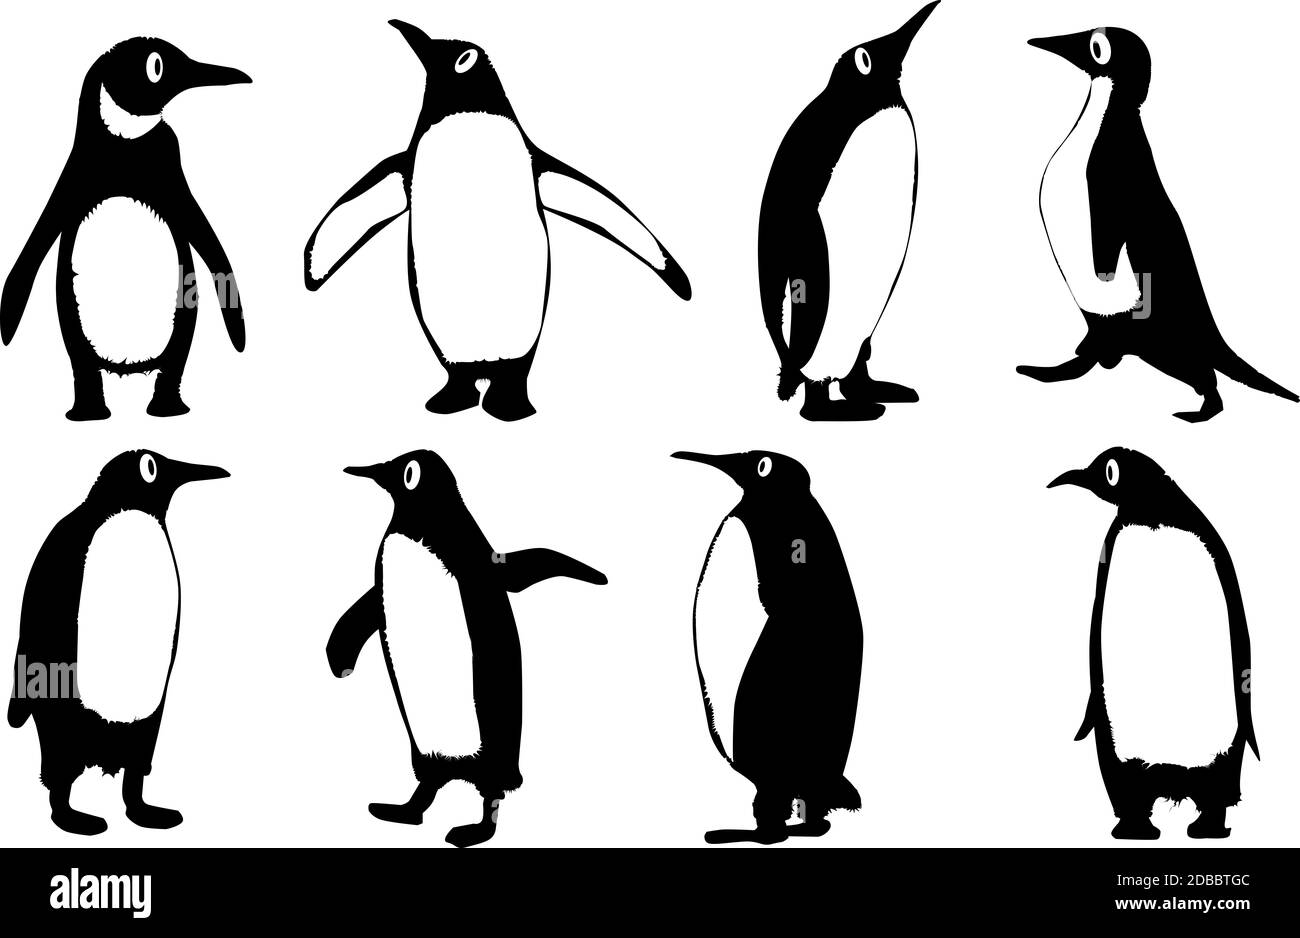 A collection of 8 vector penguins isolated on a white background. Stock Photo